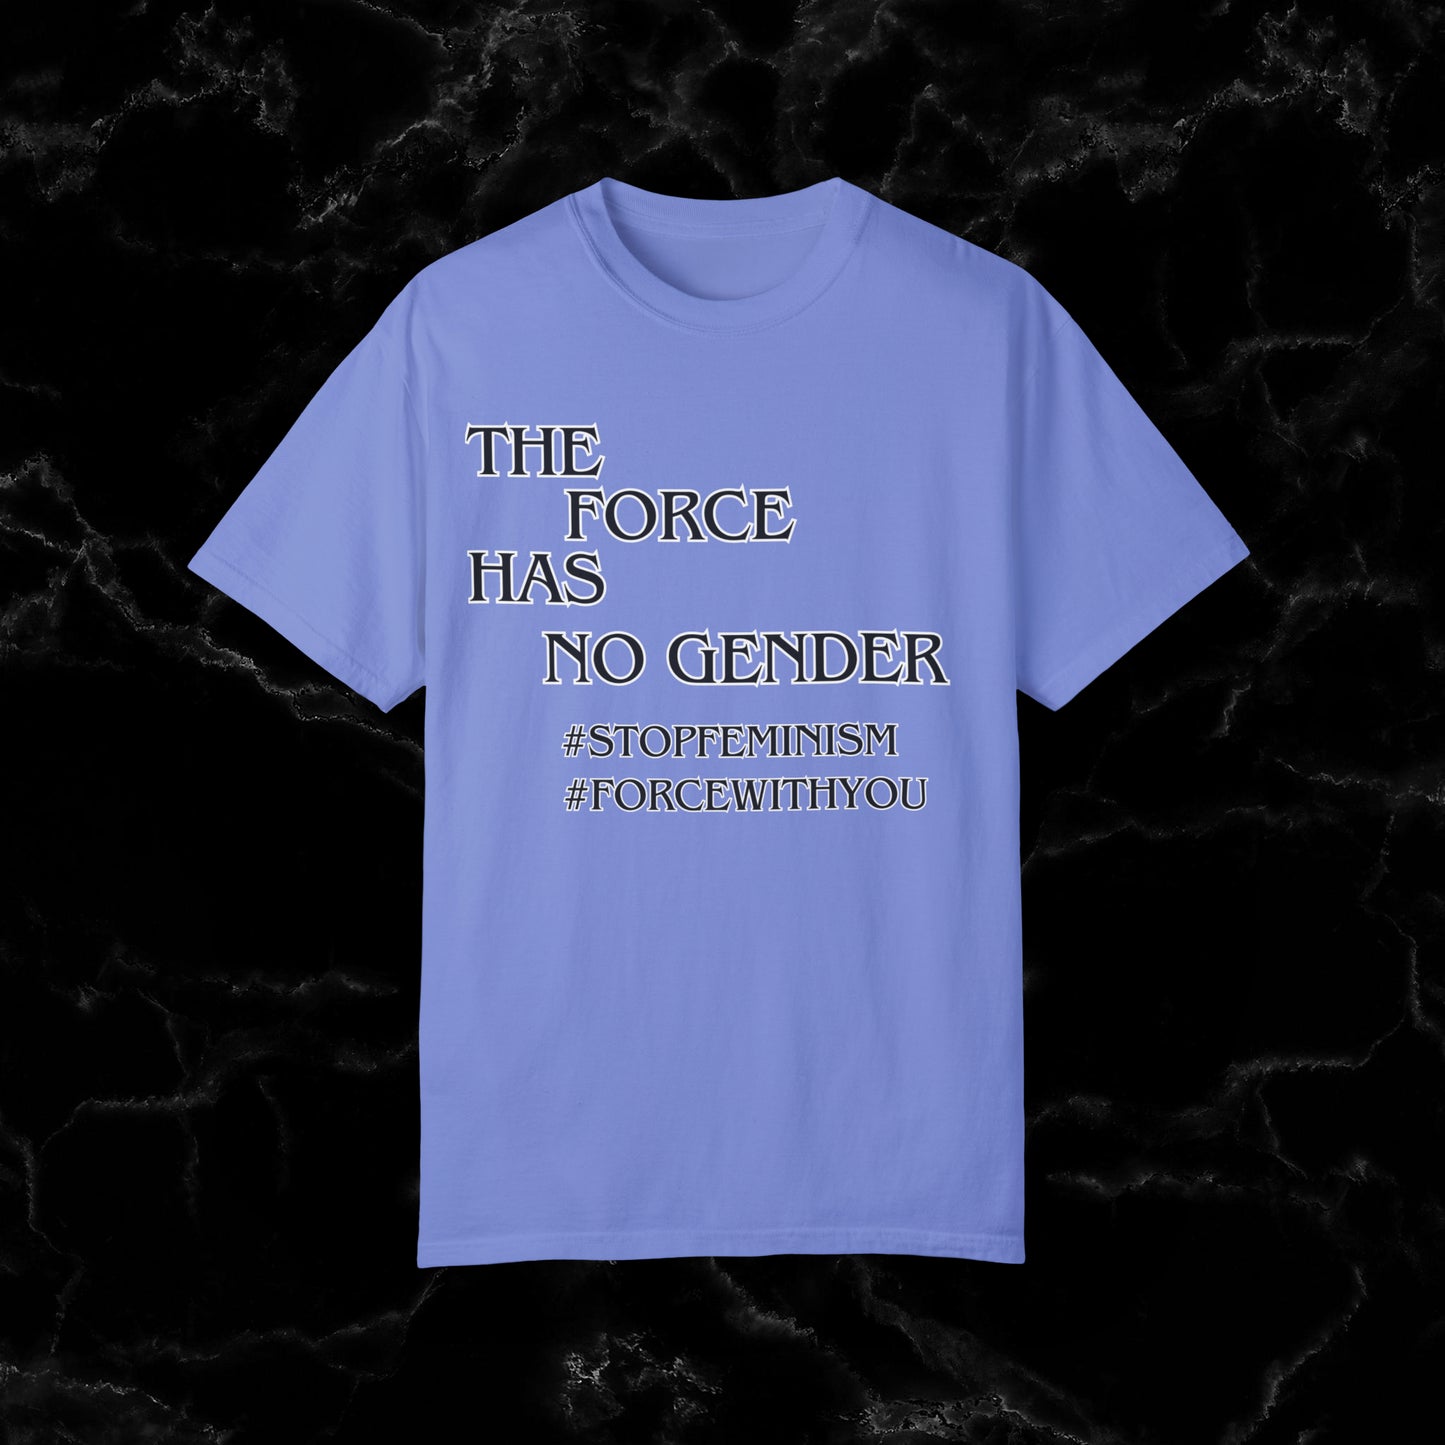 The Force Has No Gender, Embrace Inclusivity with 'Force With You' Star Wars Inspired Shirt T-Shirt Flo Blue S 